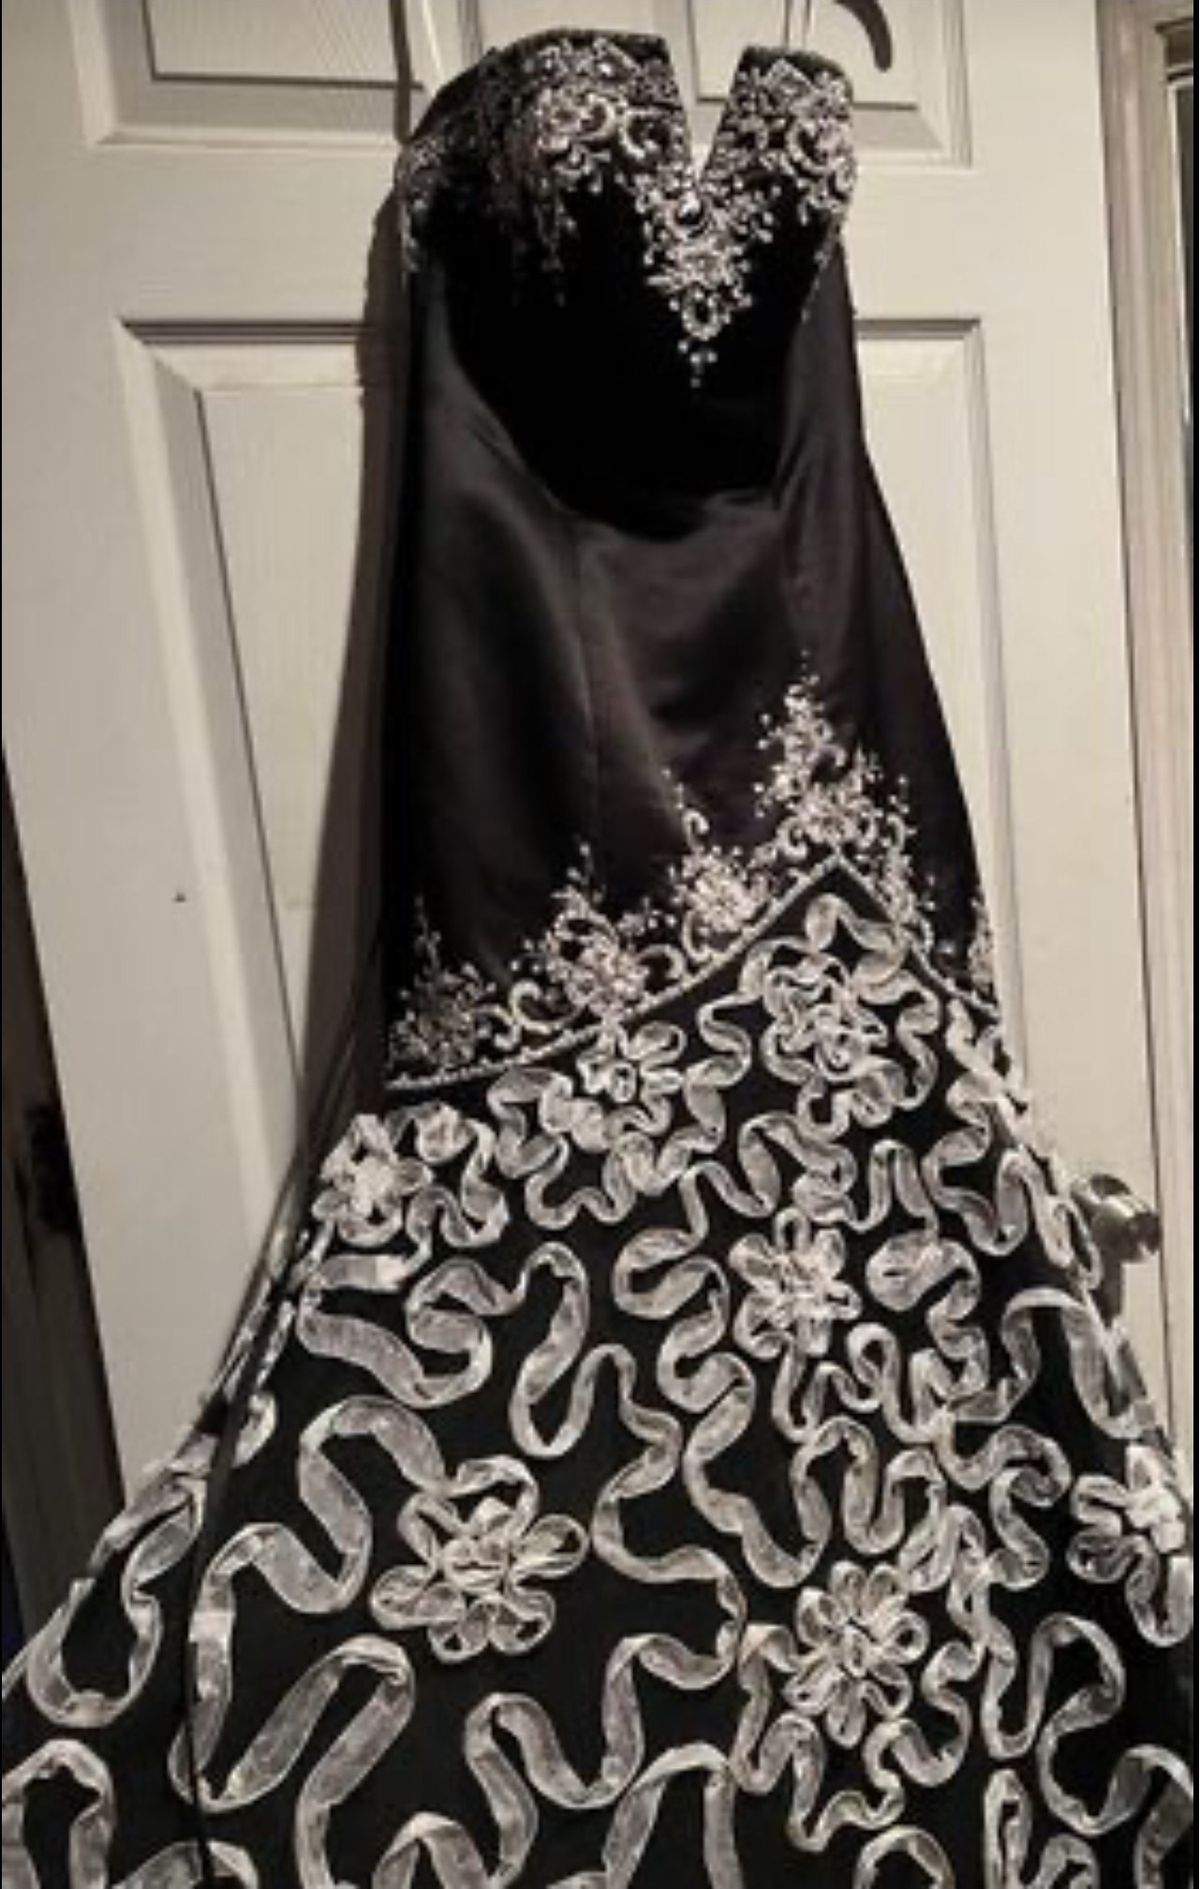 Size 6 Prom Black Ball Gown on Queenly